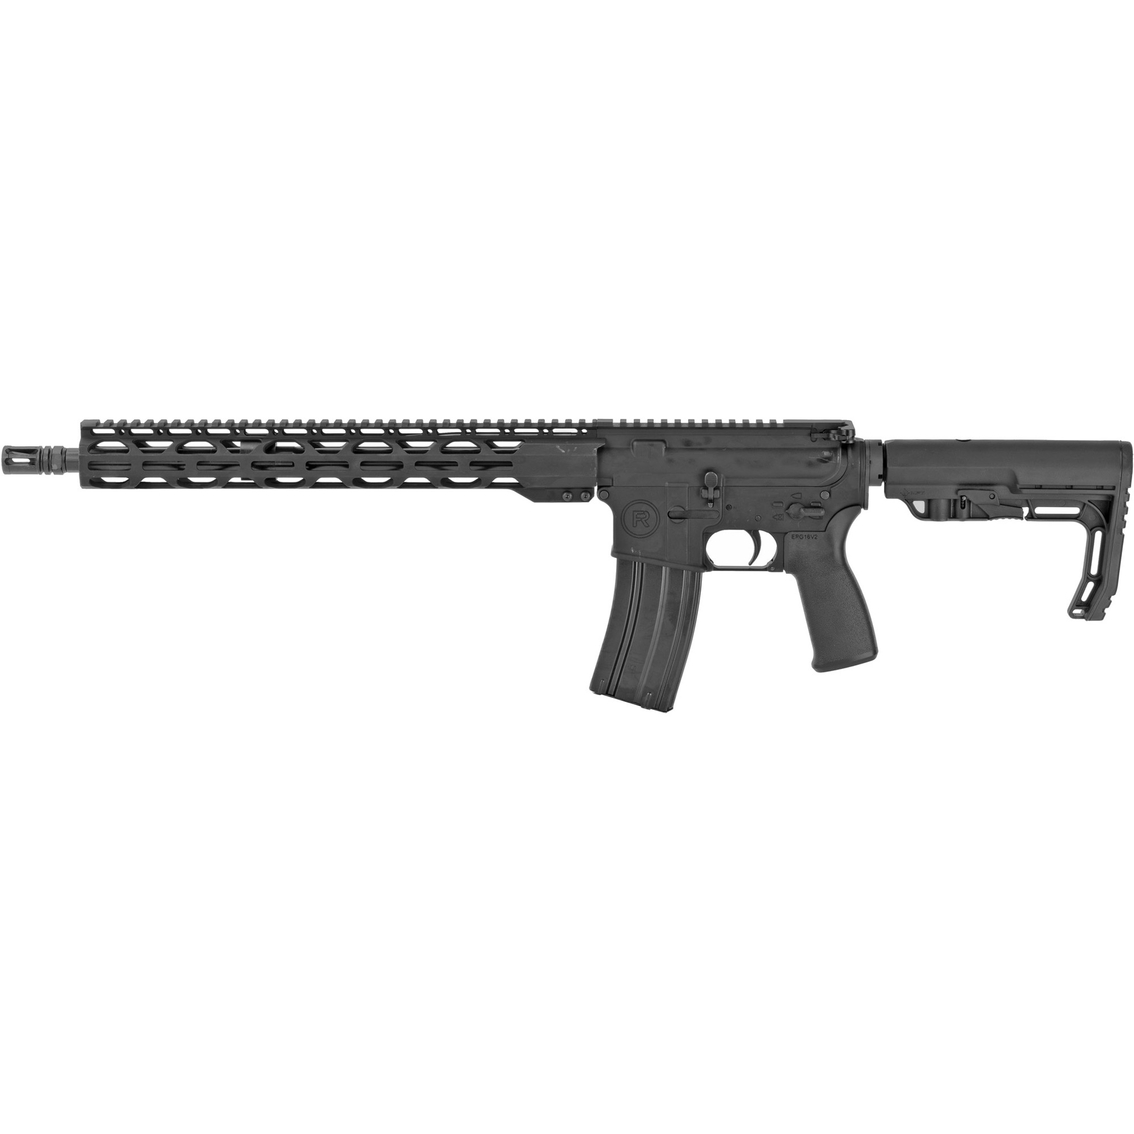 Radical Firearms Forged 556NATO 16 in. Barrel 30 Rds MFT Grip/Stock Rifle Black - Image 2 of 3